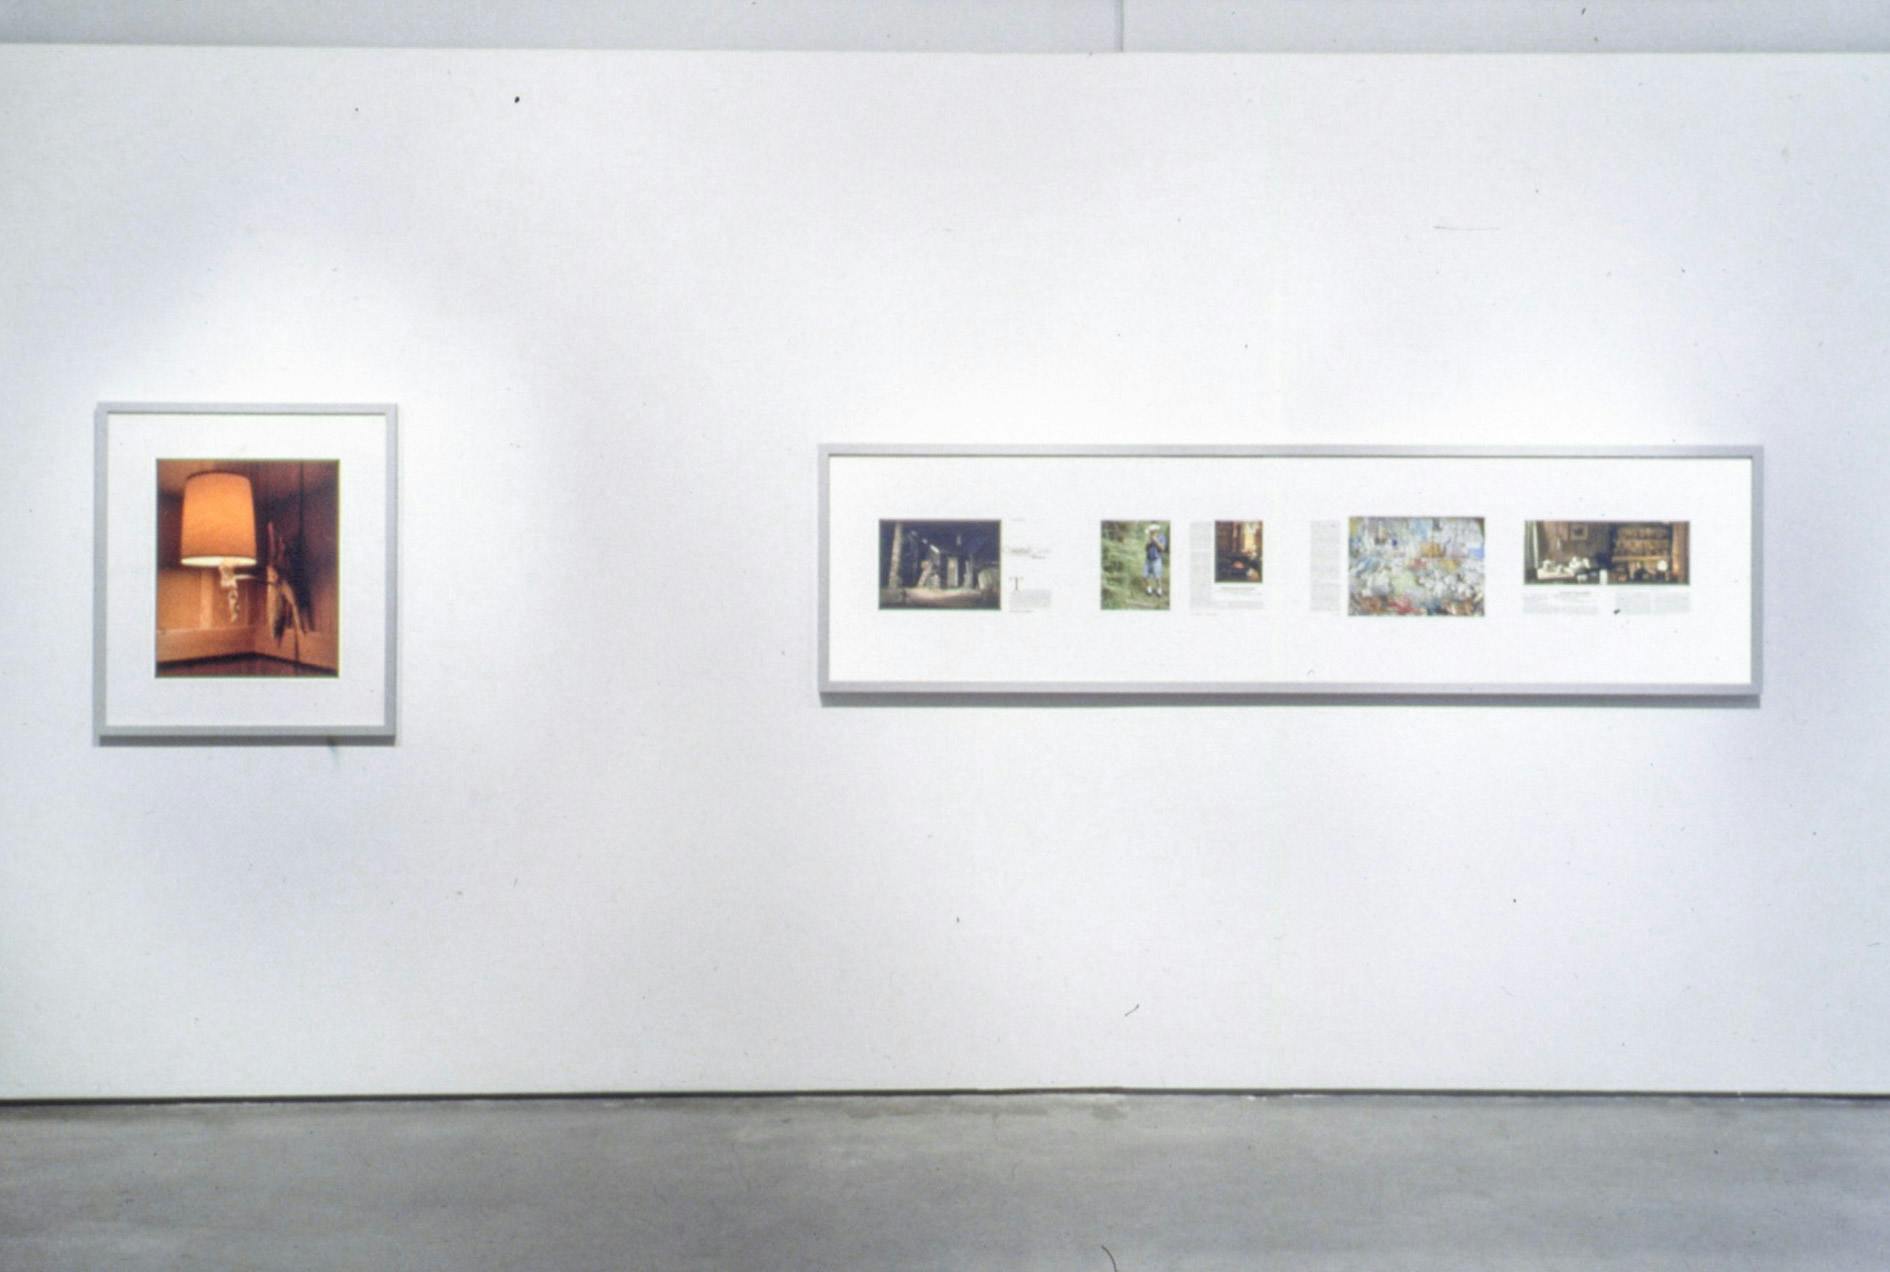 Two artworks are mounted on the gallery walls. The photograph on the left depicts a wall lamp. The photo collage on the right contains five various photographs taken at different locations.  